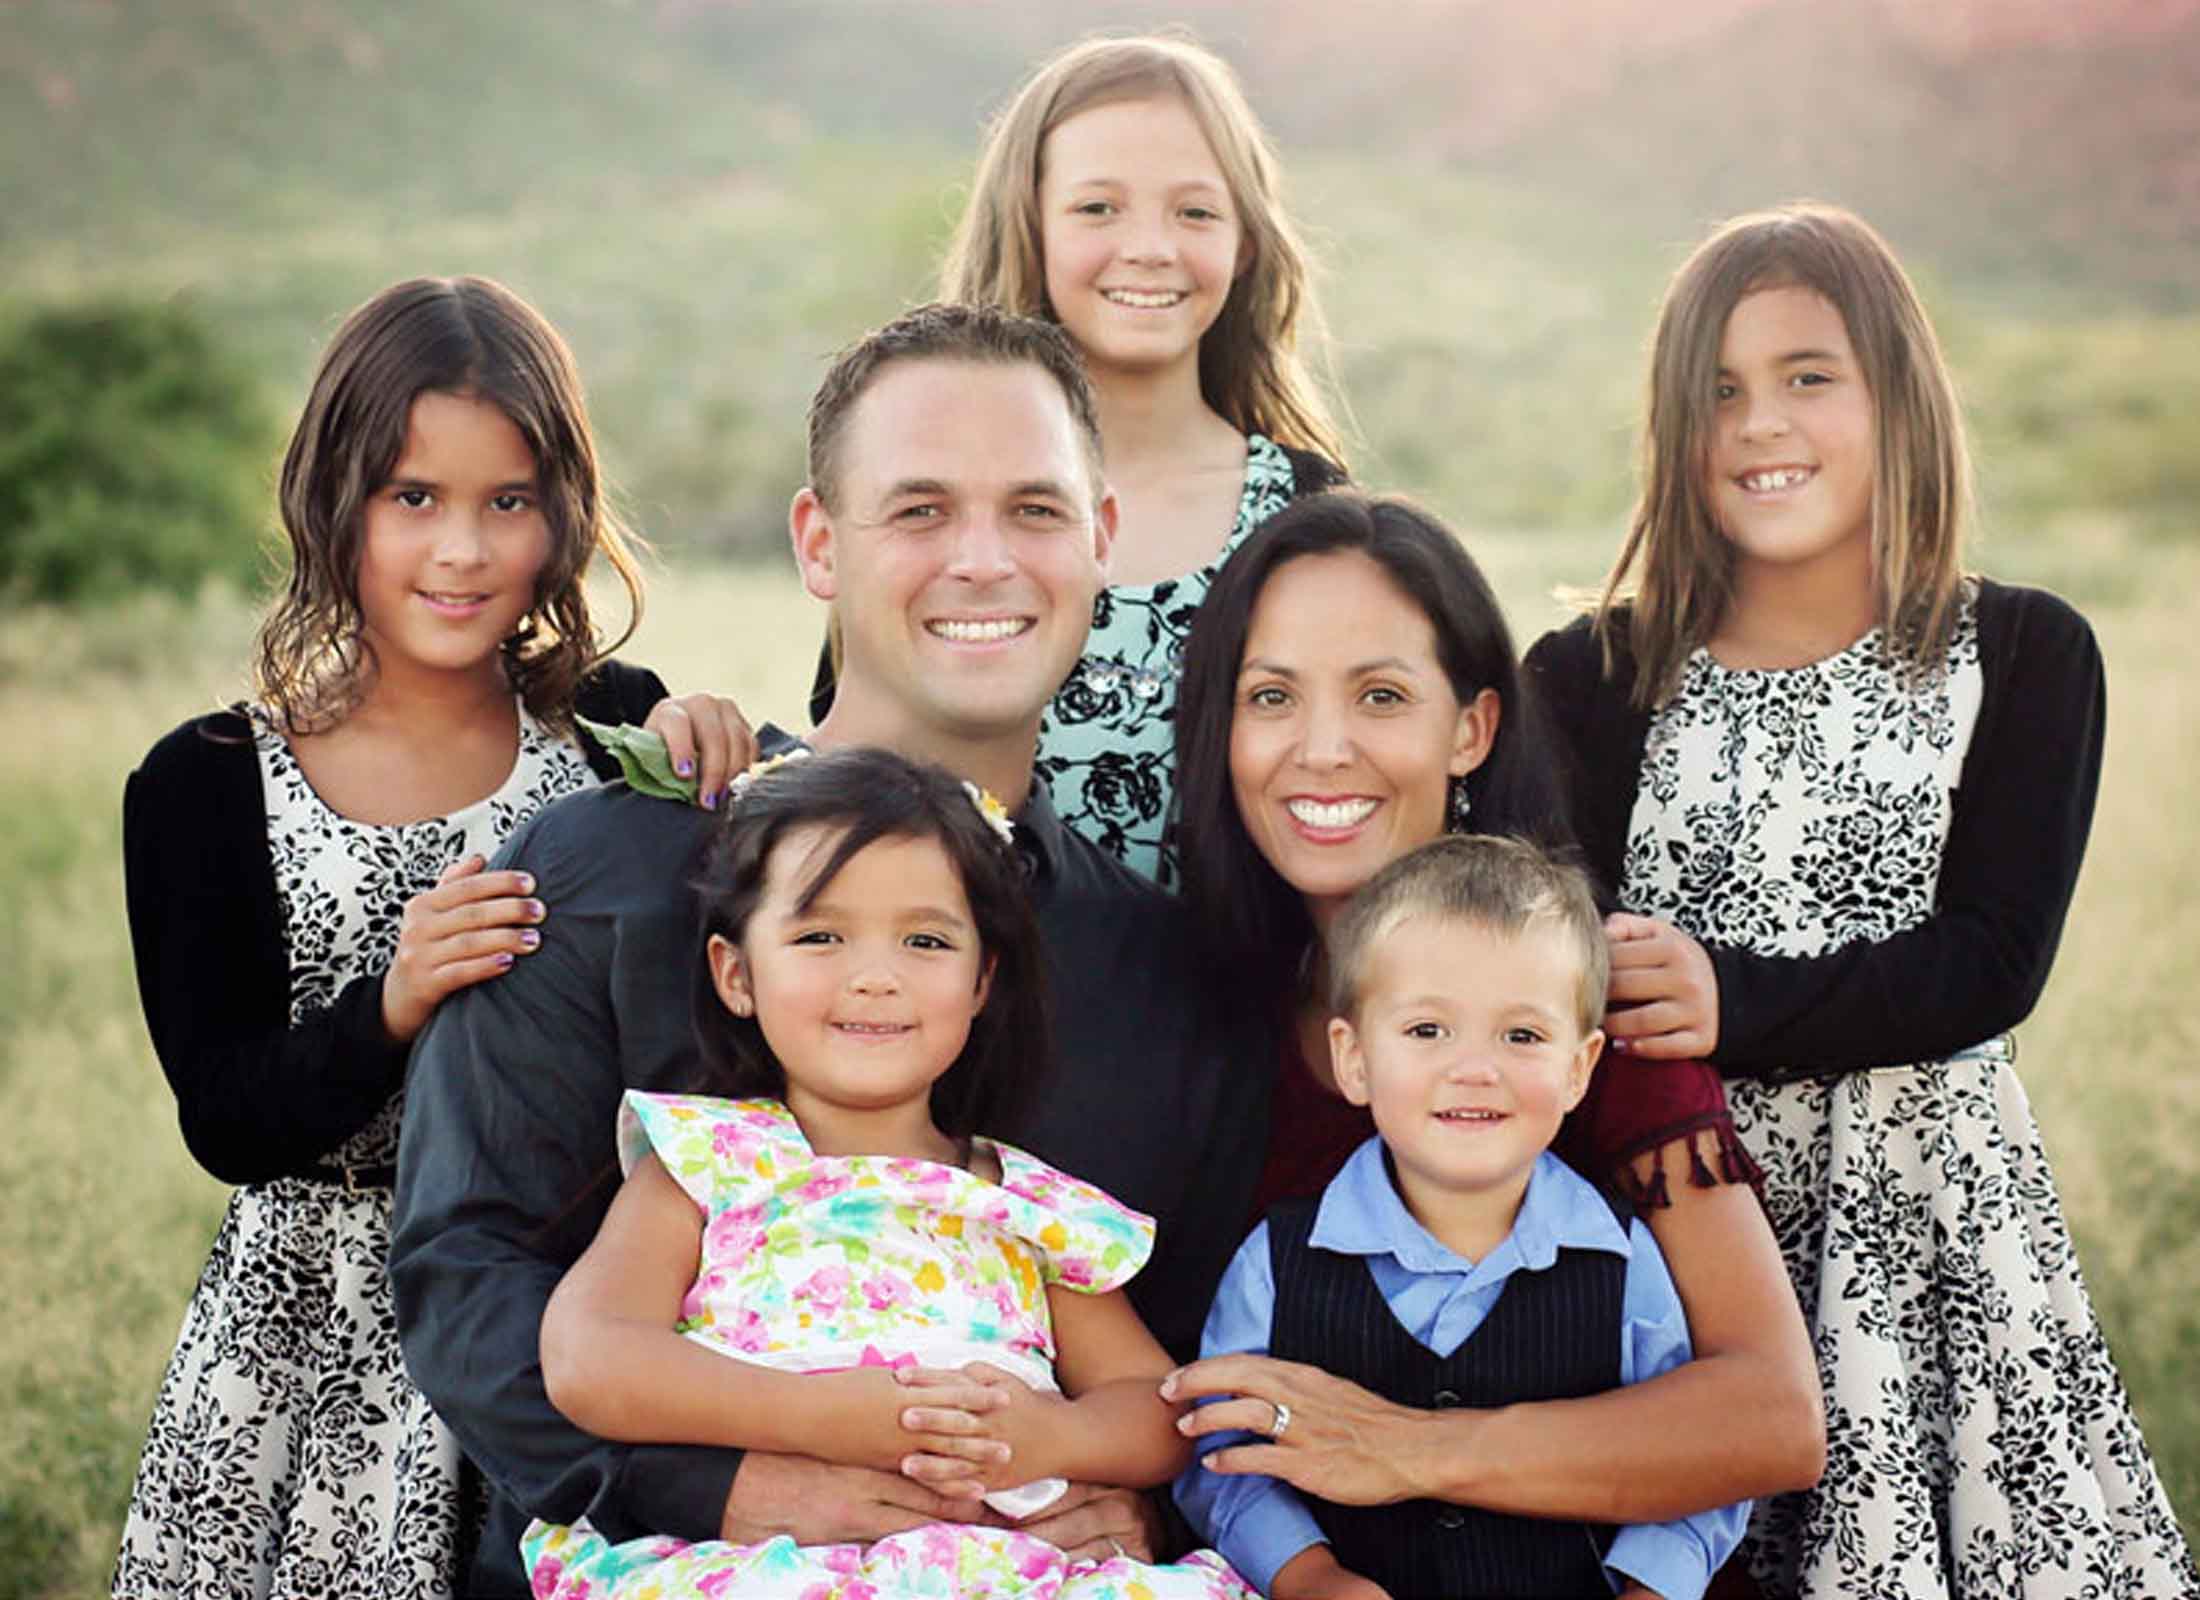 westside dentistry el paso tx home welcome to westside dentistry image doctor family smiling at camera